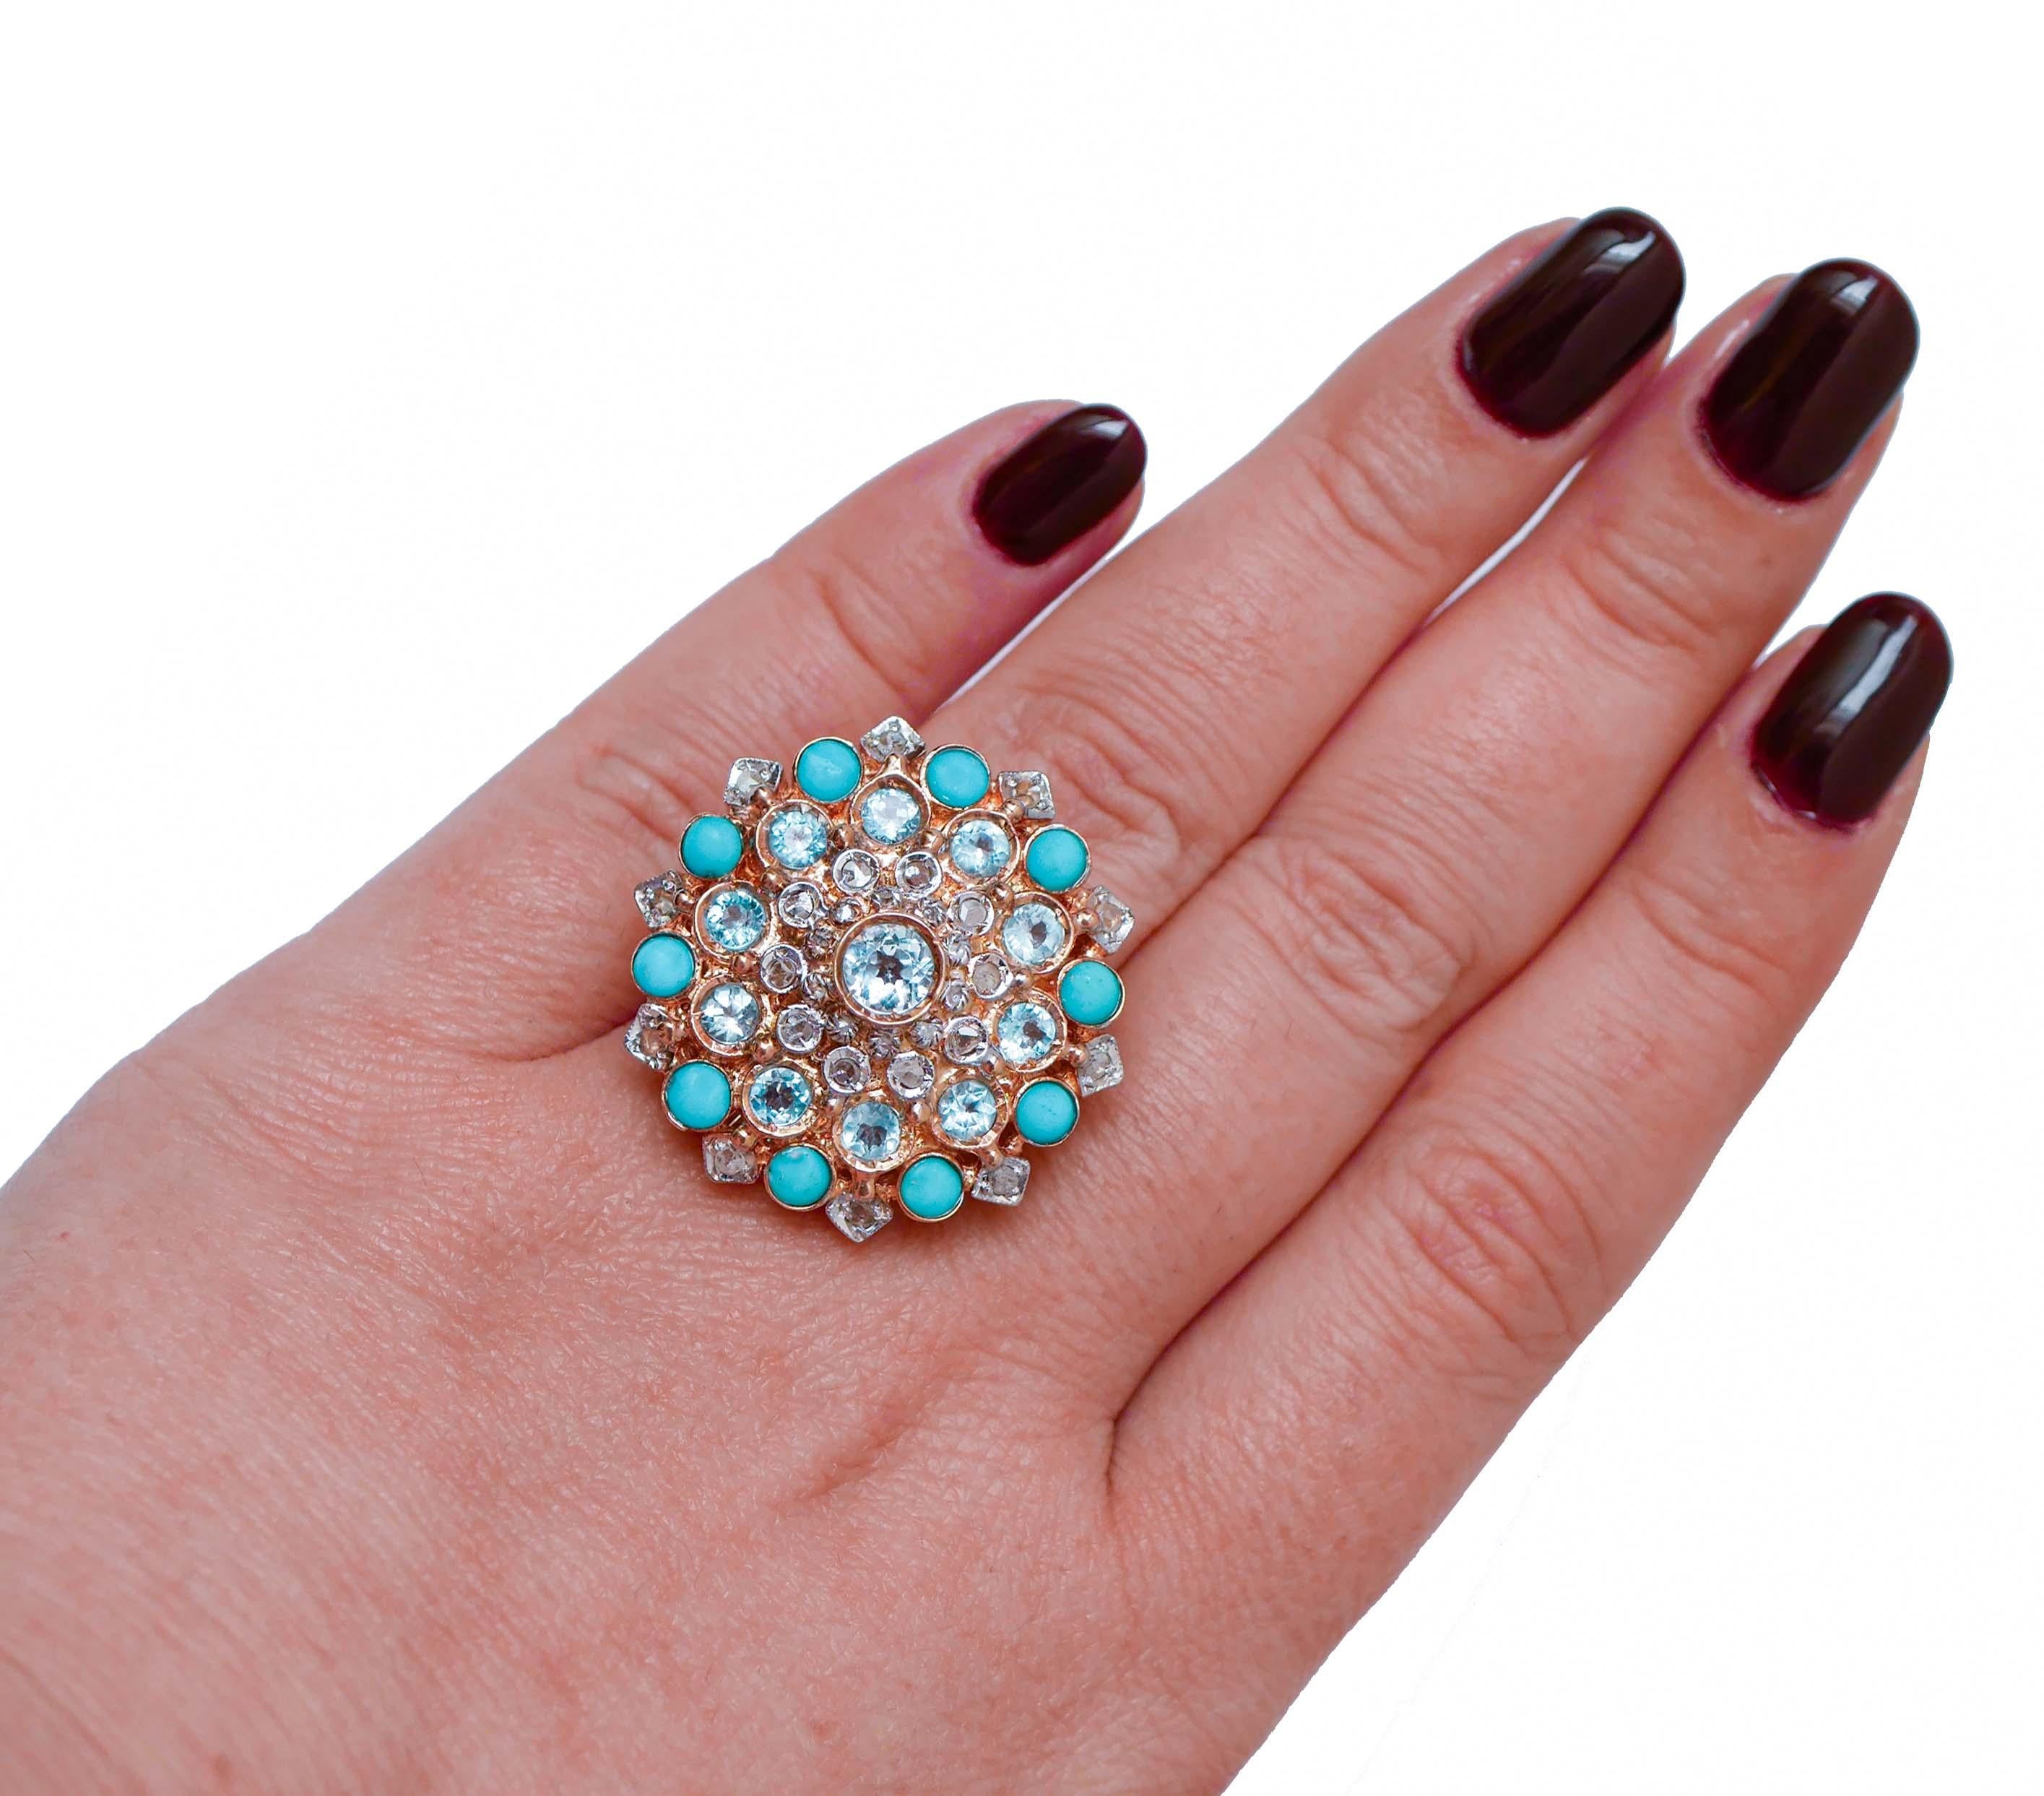 Mixed Cut Turquoise, Aquamarine Colour Topazs, Diamonds, Rose Gold and Silver Ring.